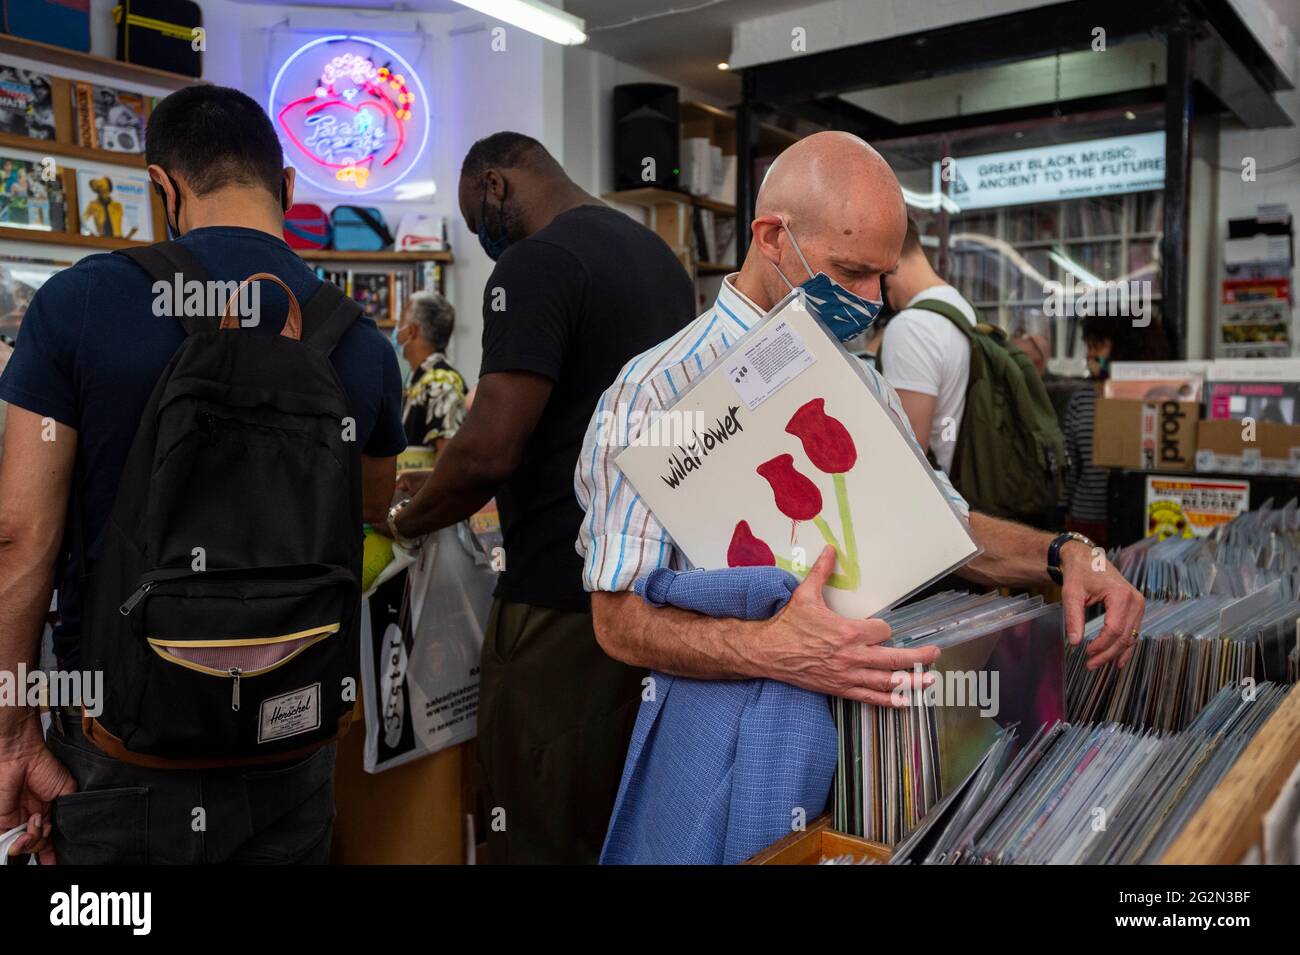 London Uk 12 June 21 Customers In Sounds Of The Universe Records In Soho On Record Store Day Where Independent Record Shops Worldwide Celebrate Music Including Special Vinyl Releases Made Exclusively For